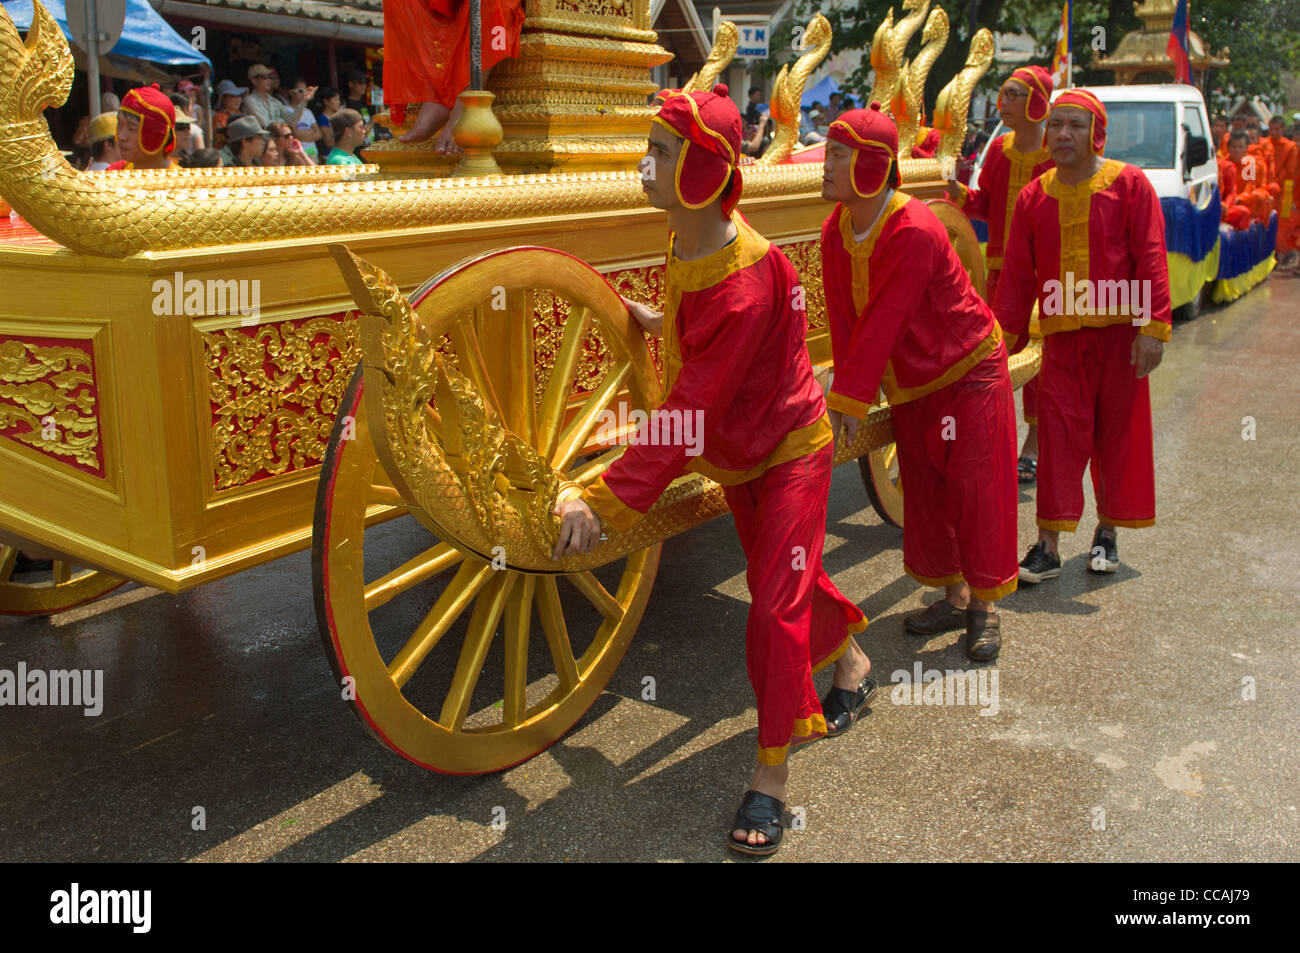 Acolytes pushing an ornate golden carriage in procession on Mue Nau, Lao New Year (Pi Mai Lao), Luang Prabang, Laos Stock Photo